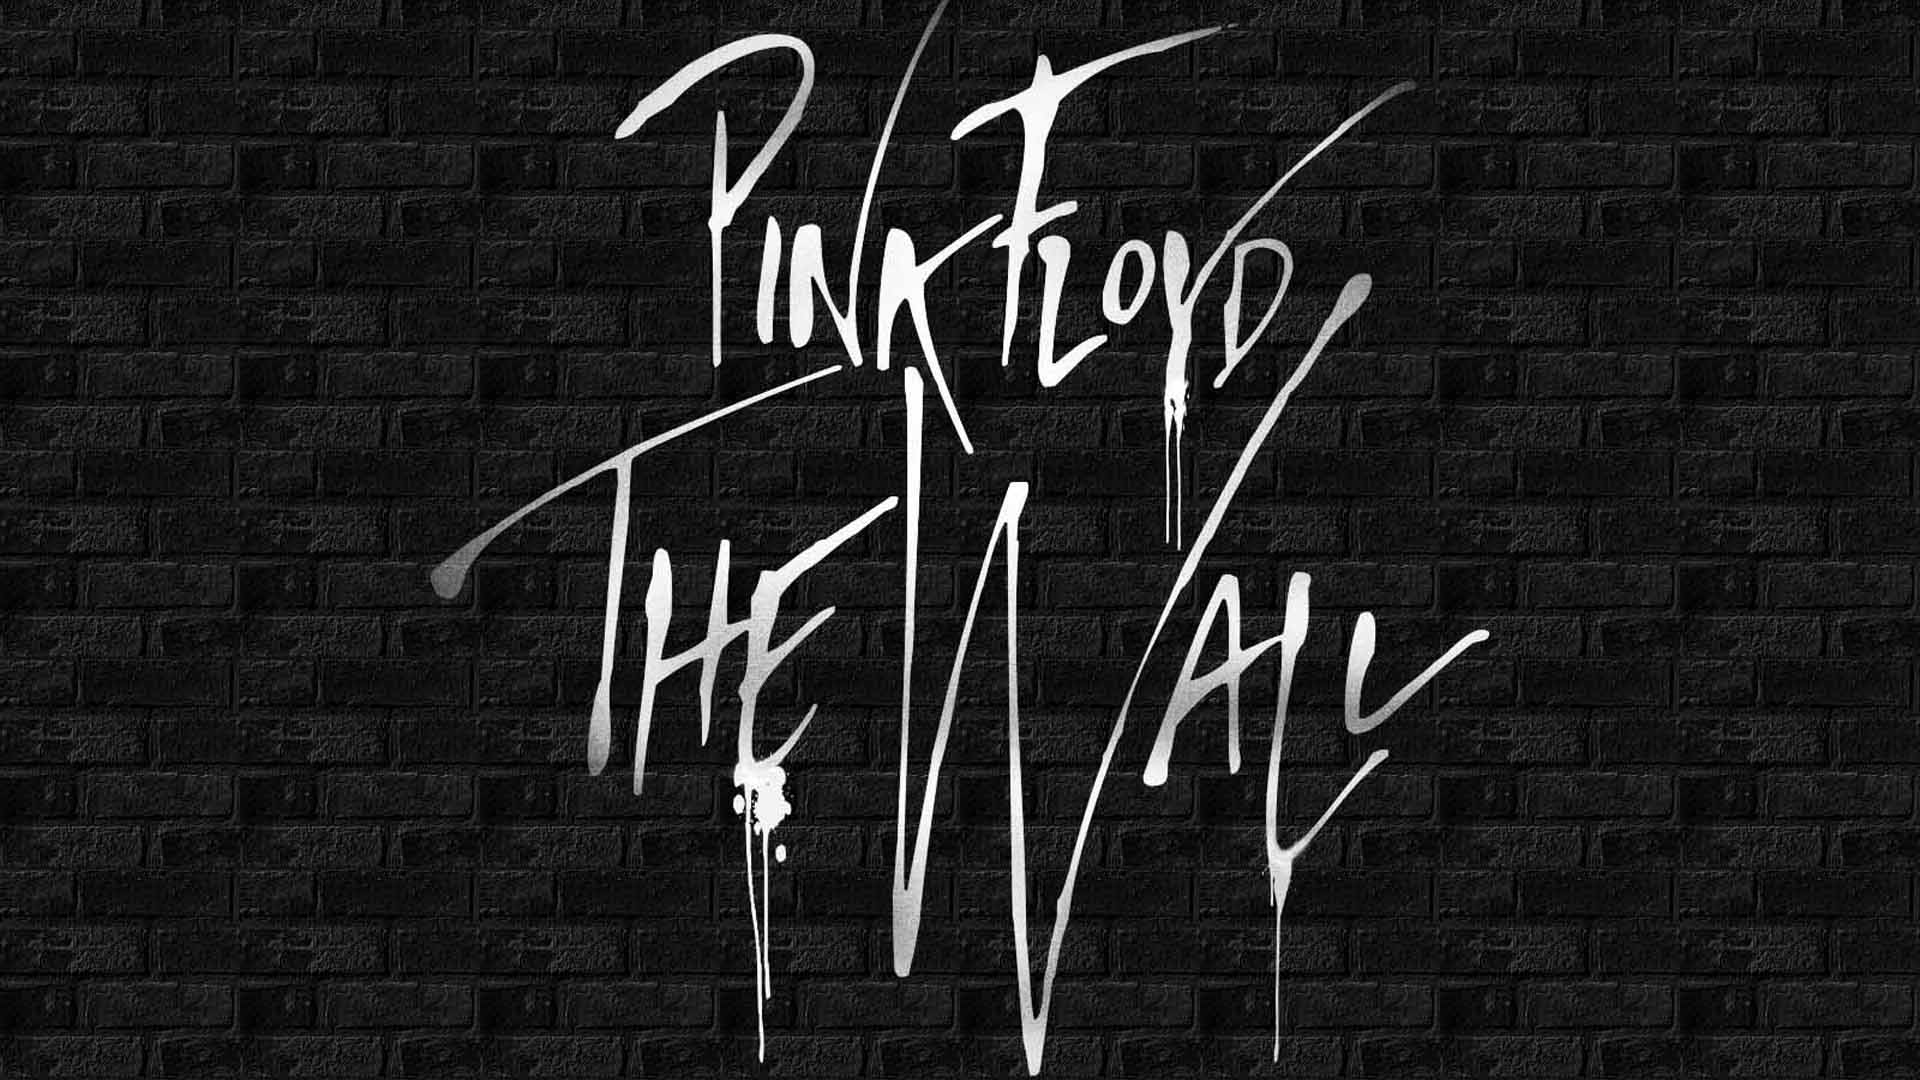  their greatest works among other Wallpapers made by Pink Floyd fans